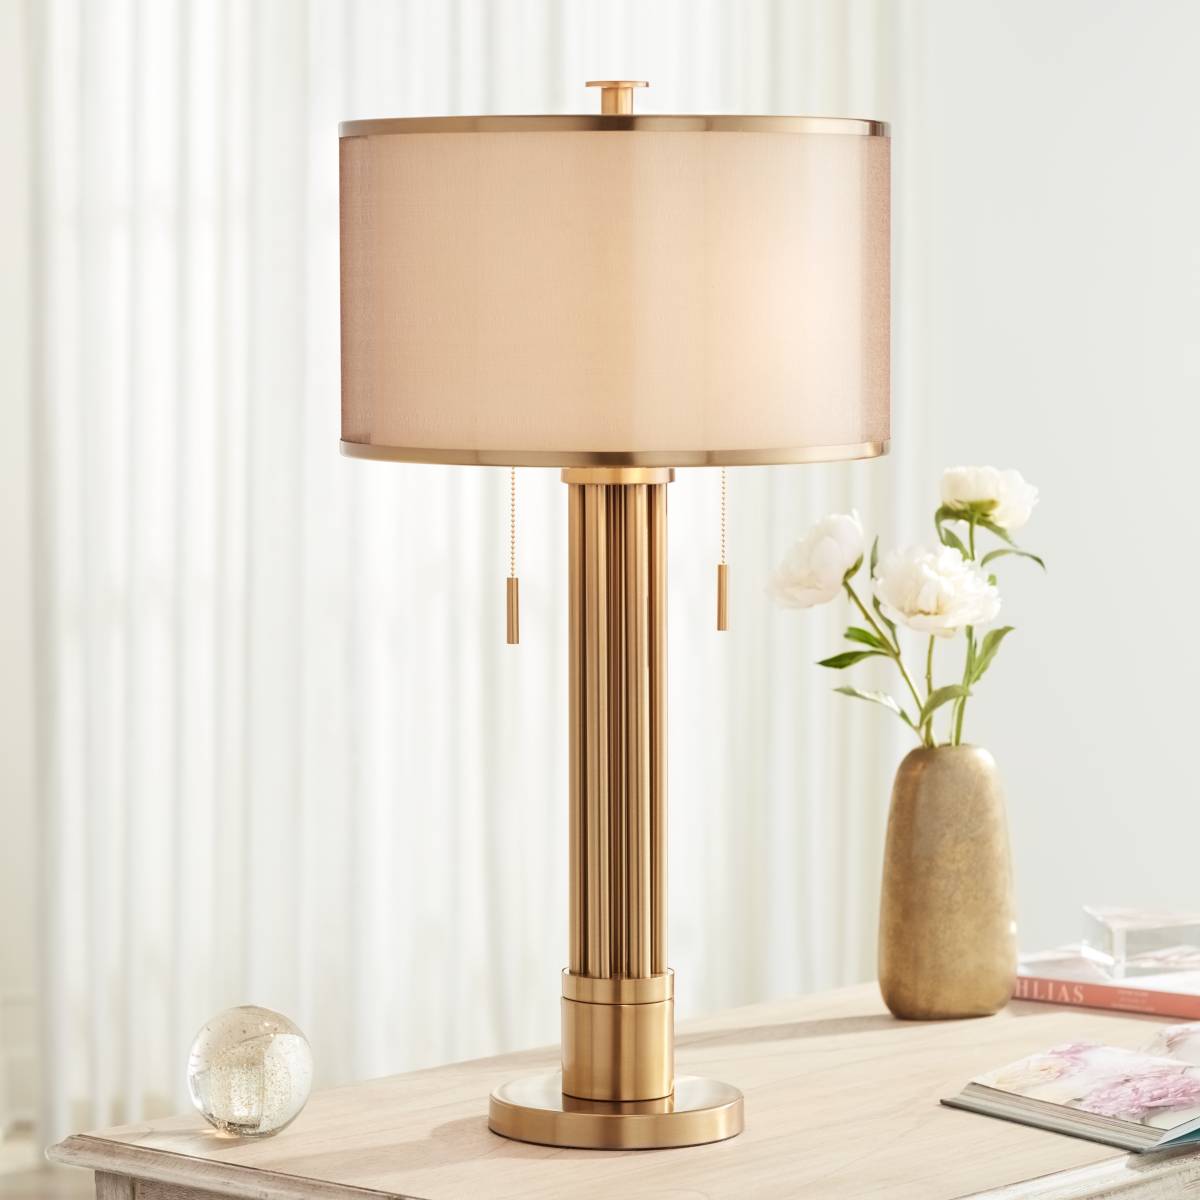 Brass - Antique Brass, Contemporary Table Lamps